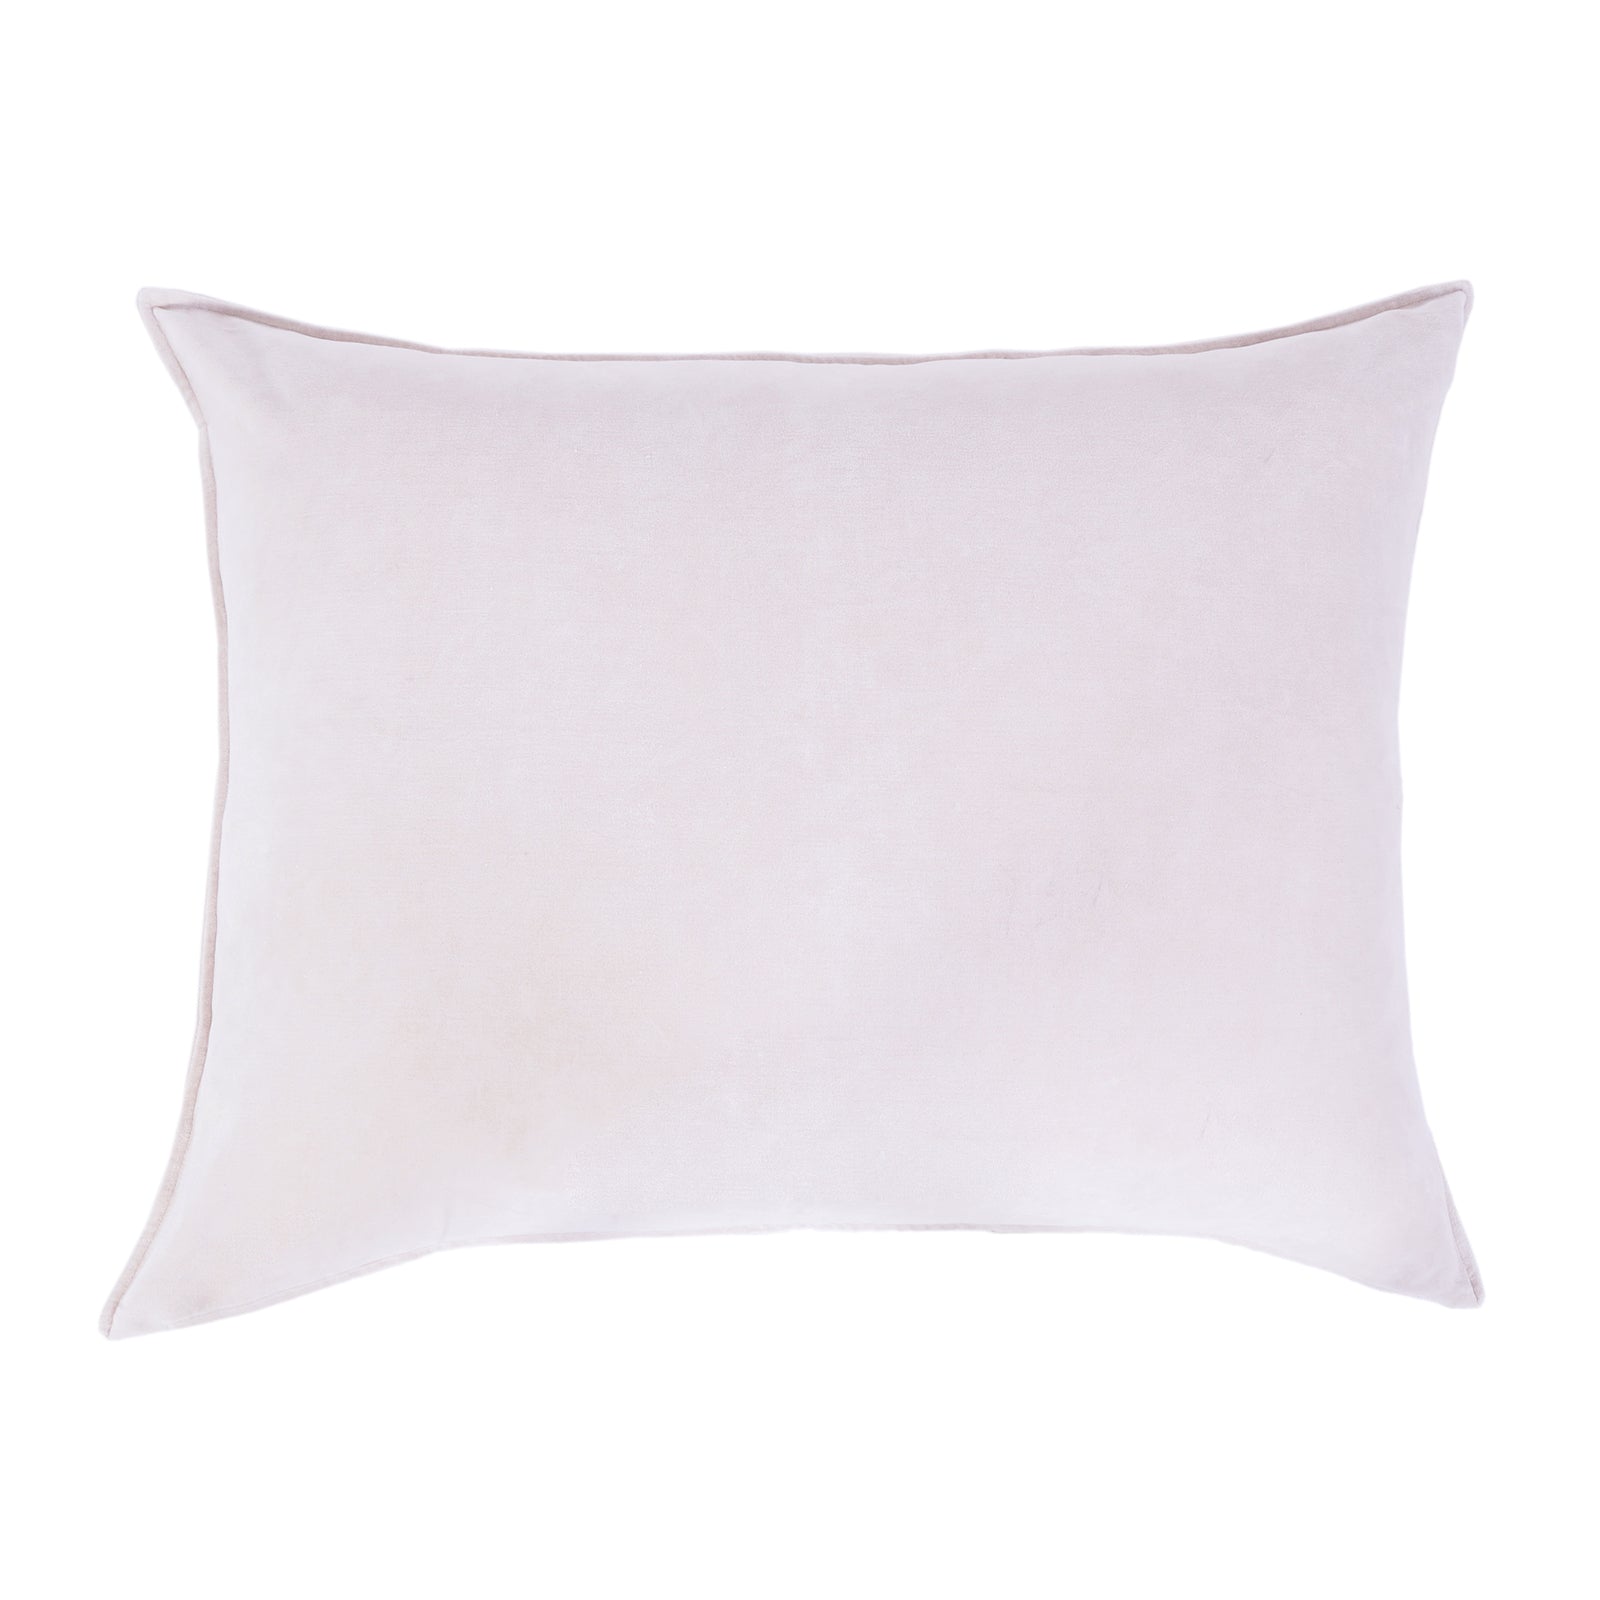 Bianca BIG PILLOW 28" X 36" WITH INSERT - Blush color - Pom pom At Home